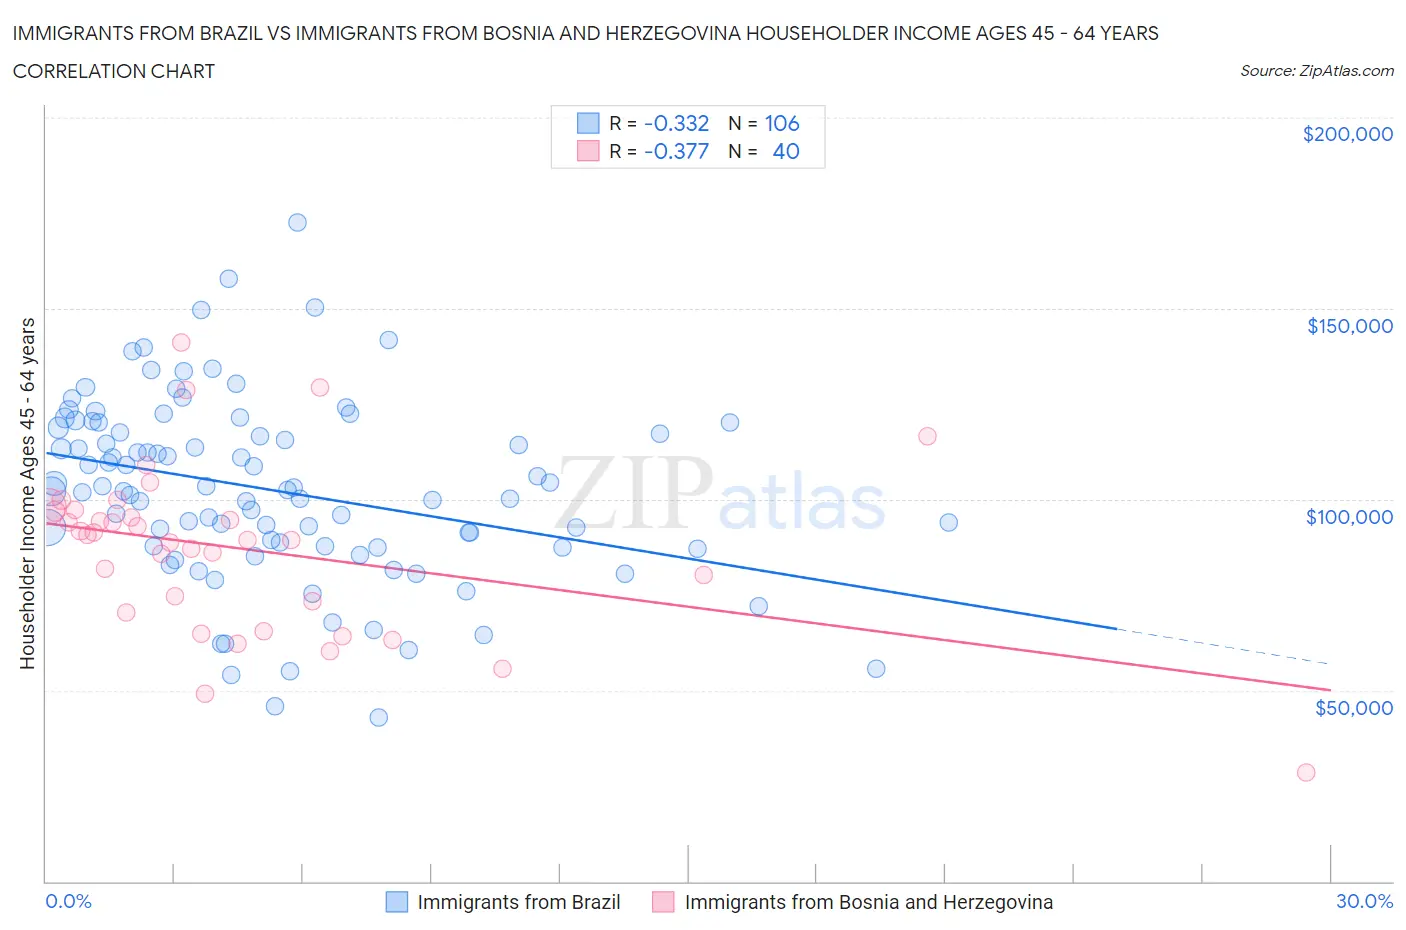 Immigrants from Brazil vs Immigrants from Bosnia and Herzegovina Householder Income Ages 45 - 64 years